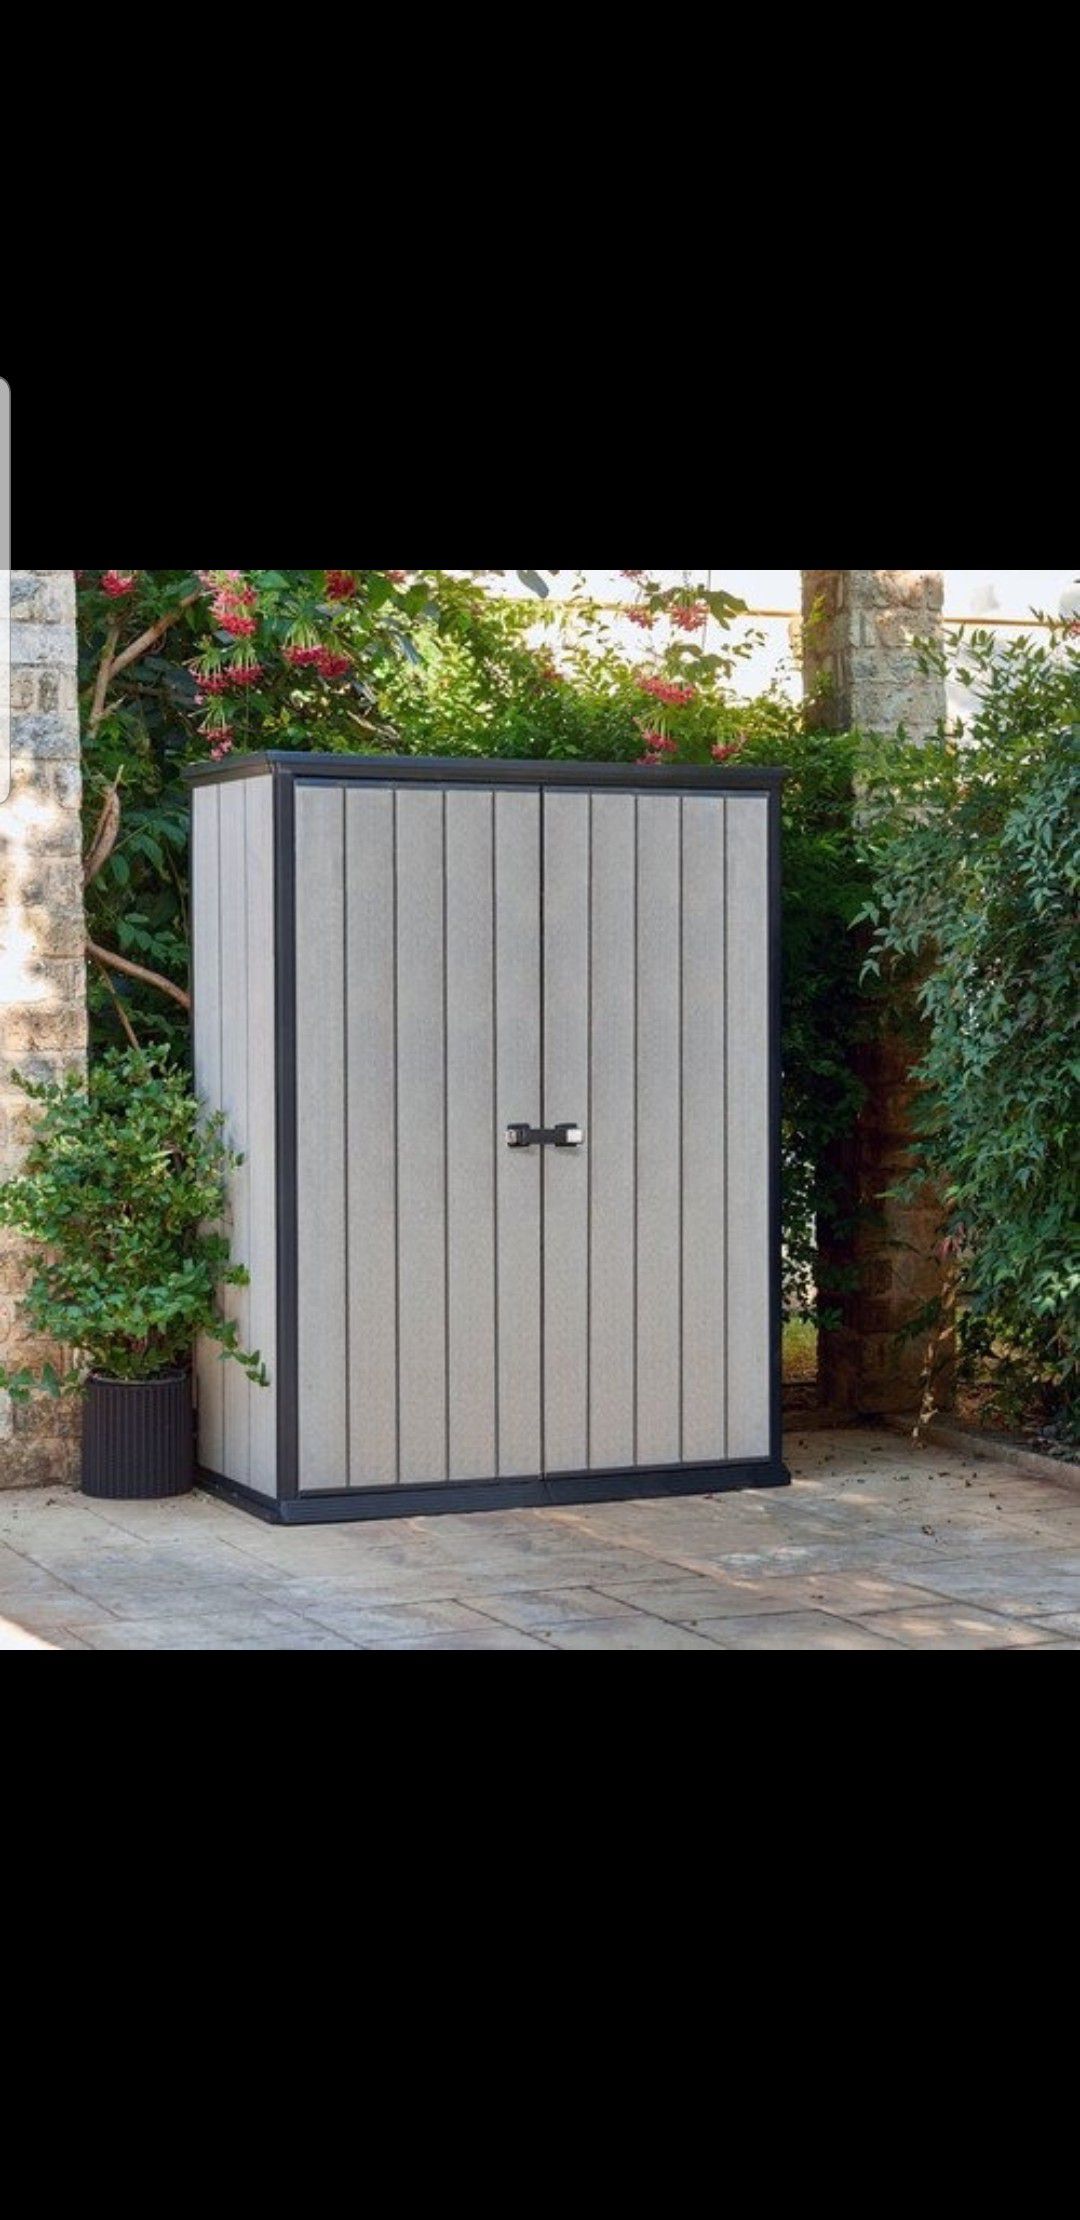 Keter High Store 6 ft. Tall Storage Shed